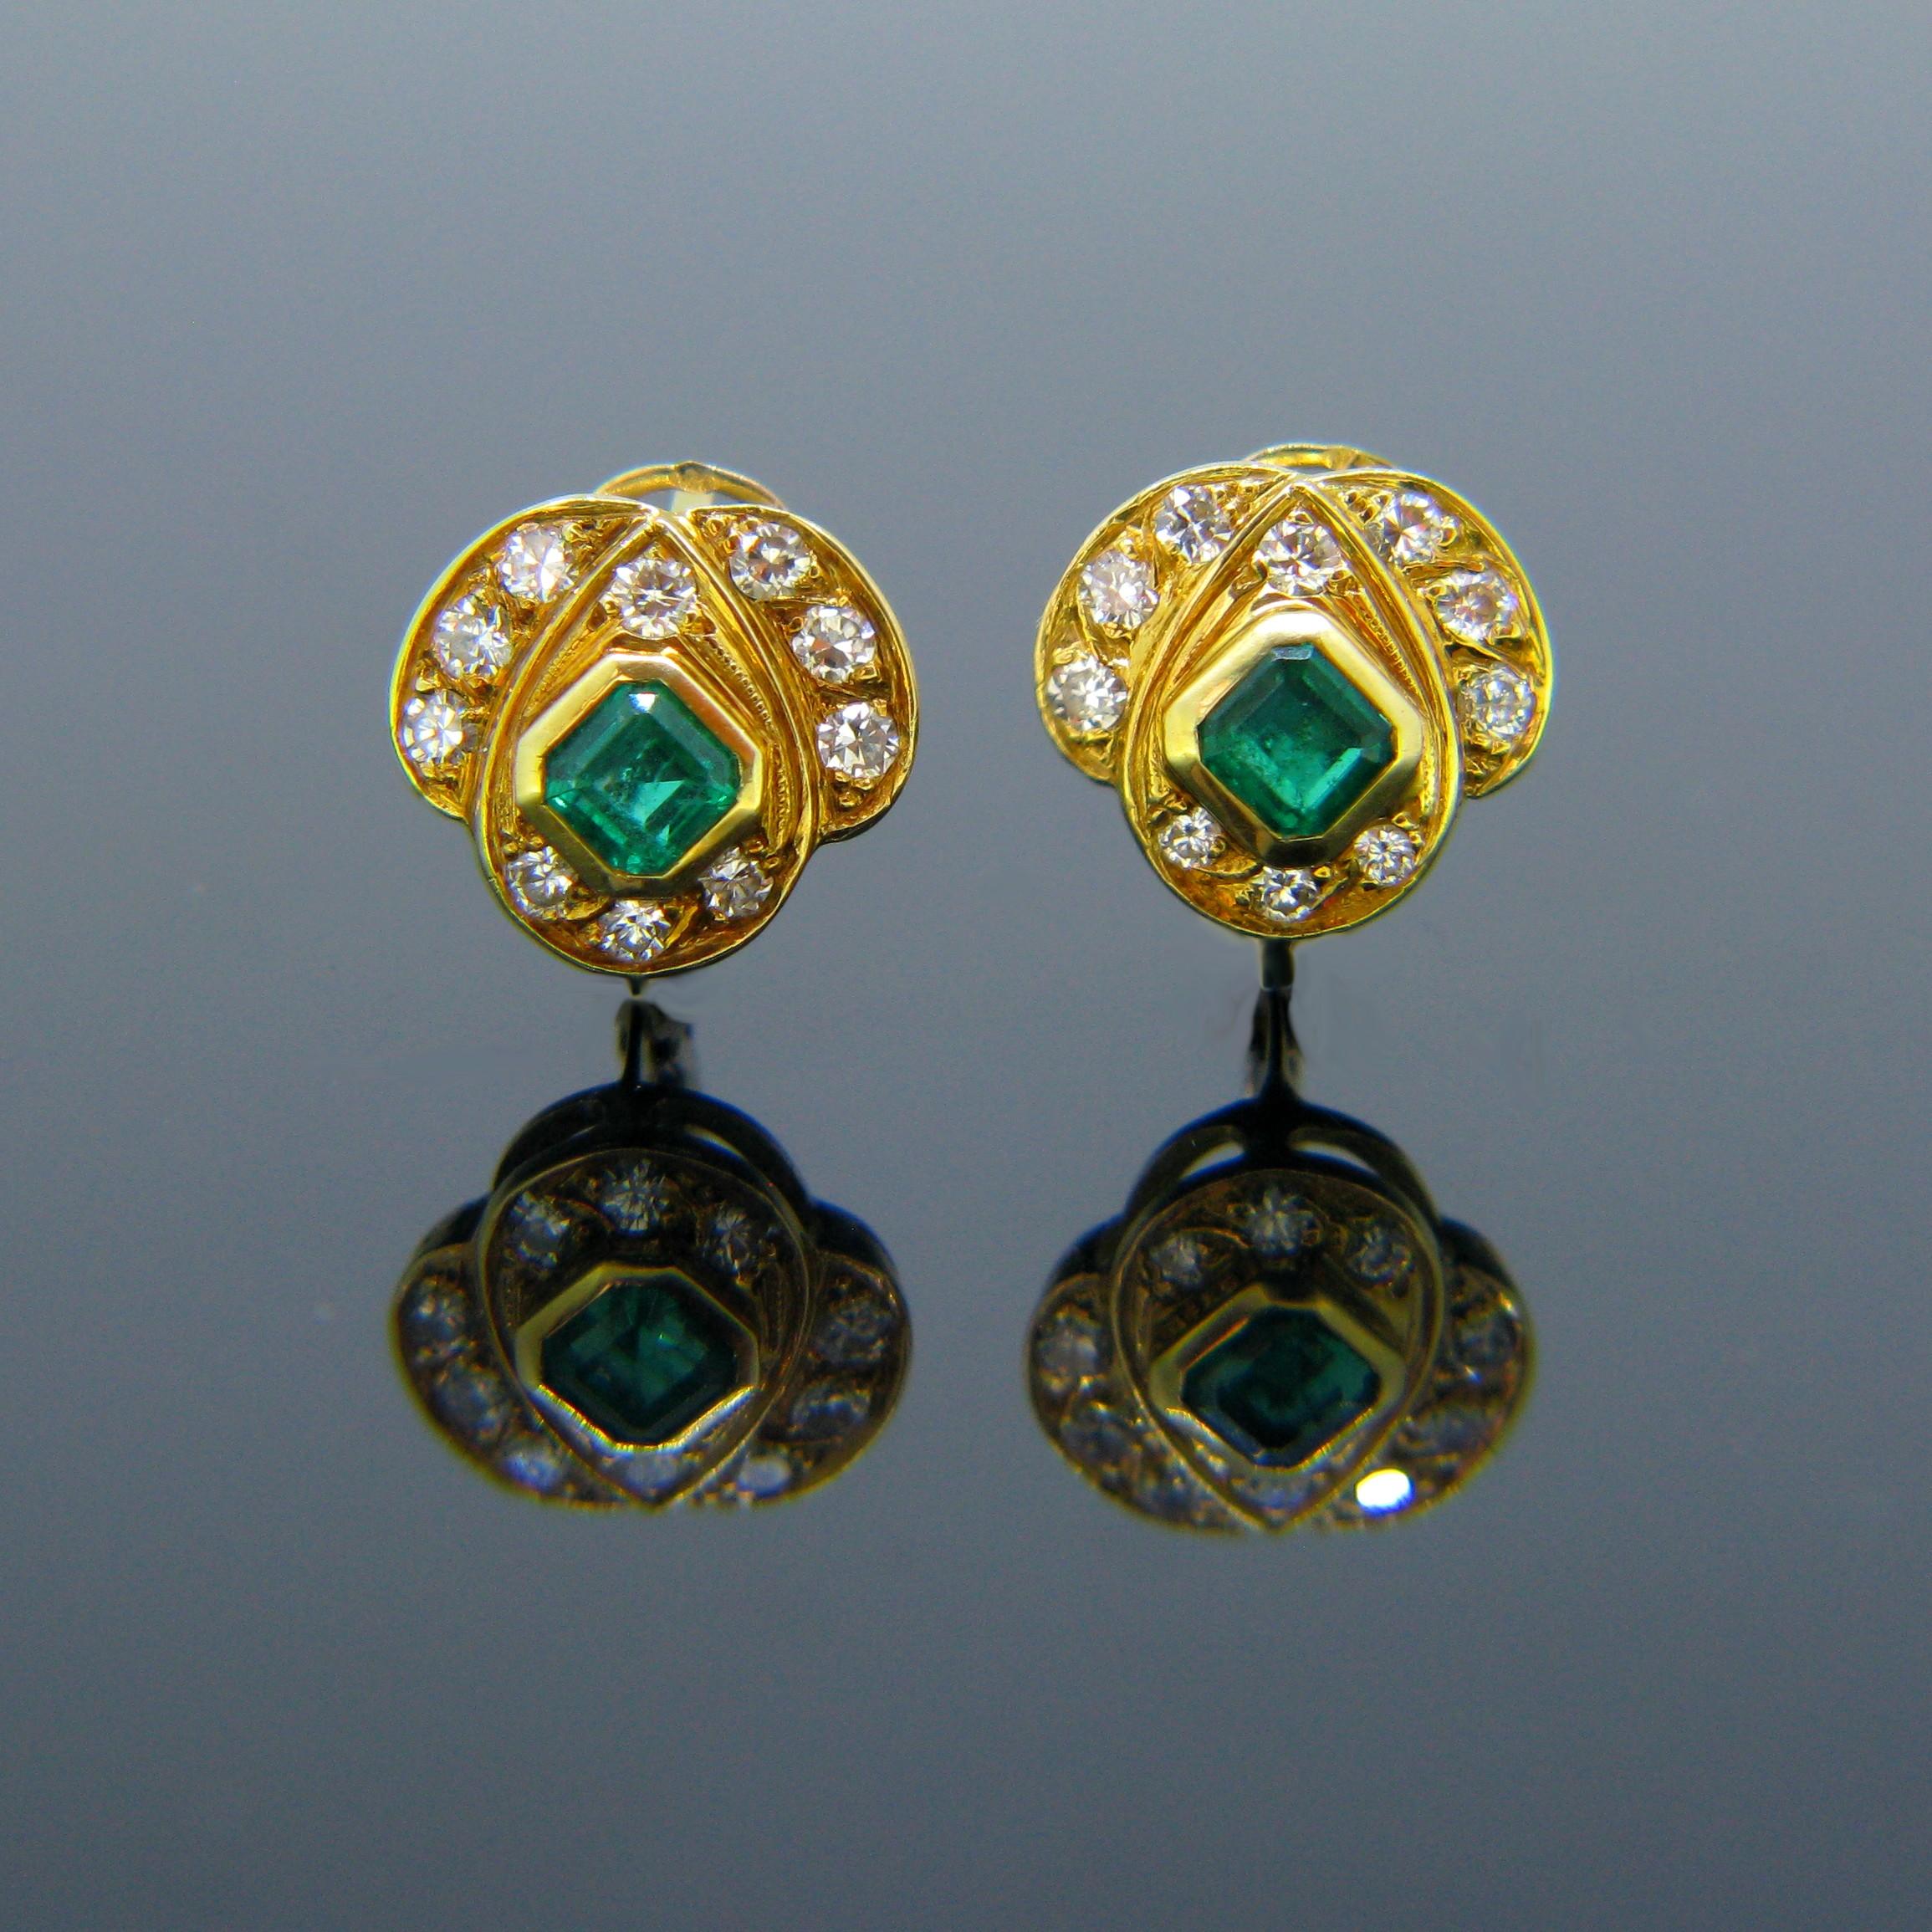 This pretty pair of earrings are set with two vibrant green square step cut emeralds weighing around 0.80ct in total and 20 round brilliant cut diamonds for a total carat weight of around 0.70ct. They are made in 18kt yellow gold. They have a great